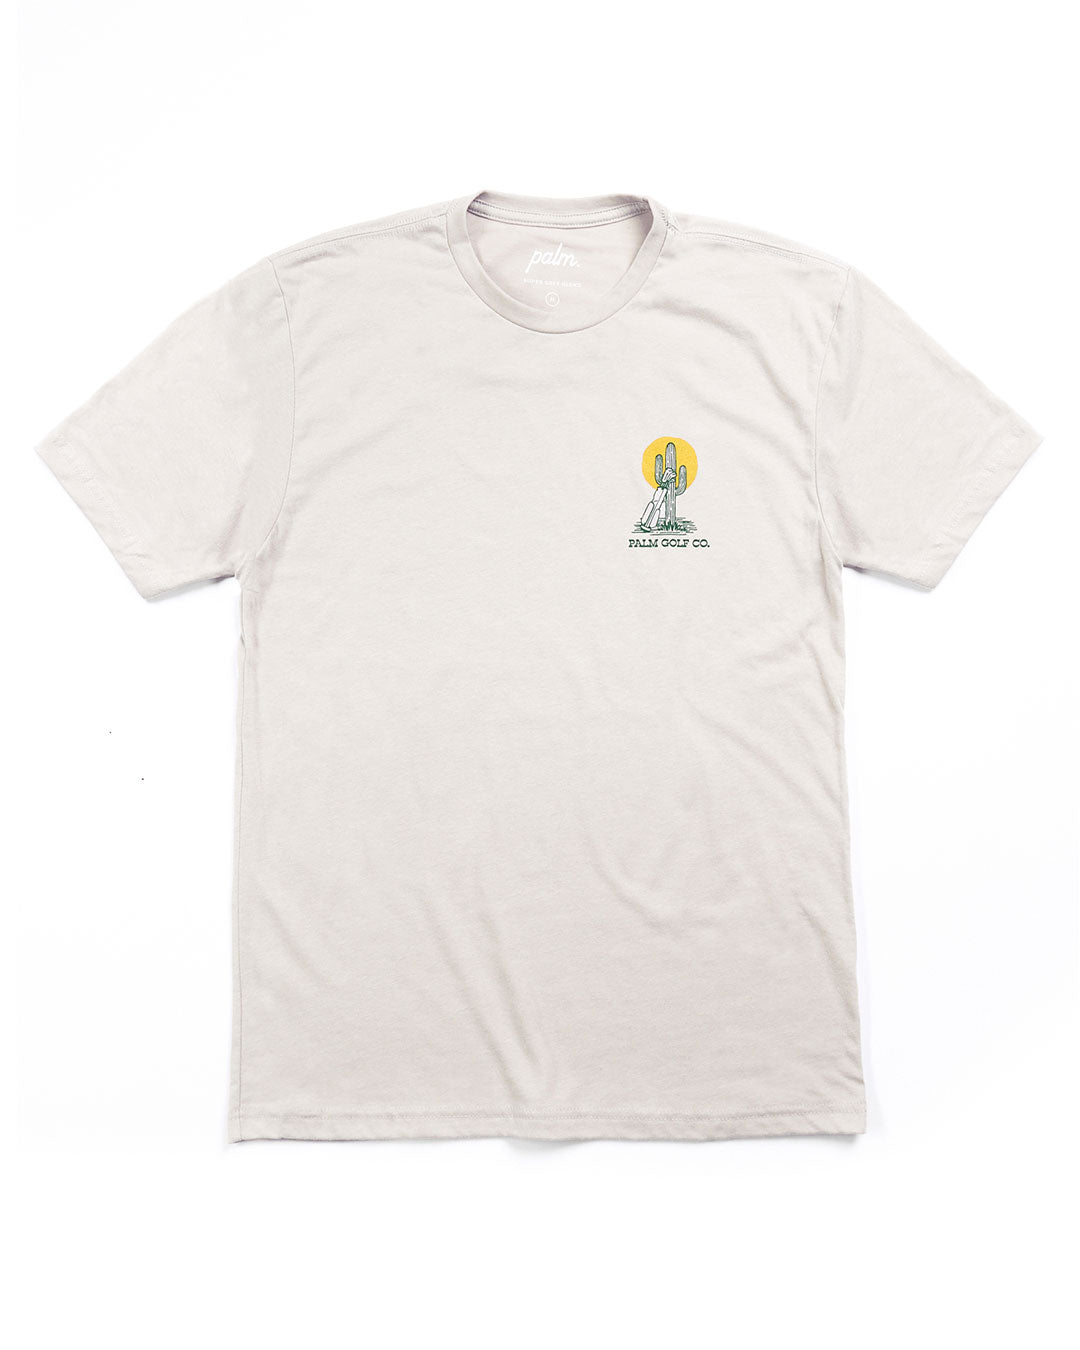 Wasted Management T-Shirt - Palm Golf Co.